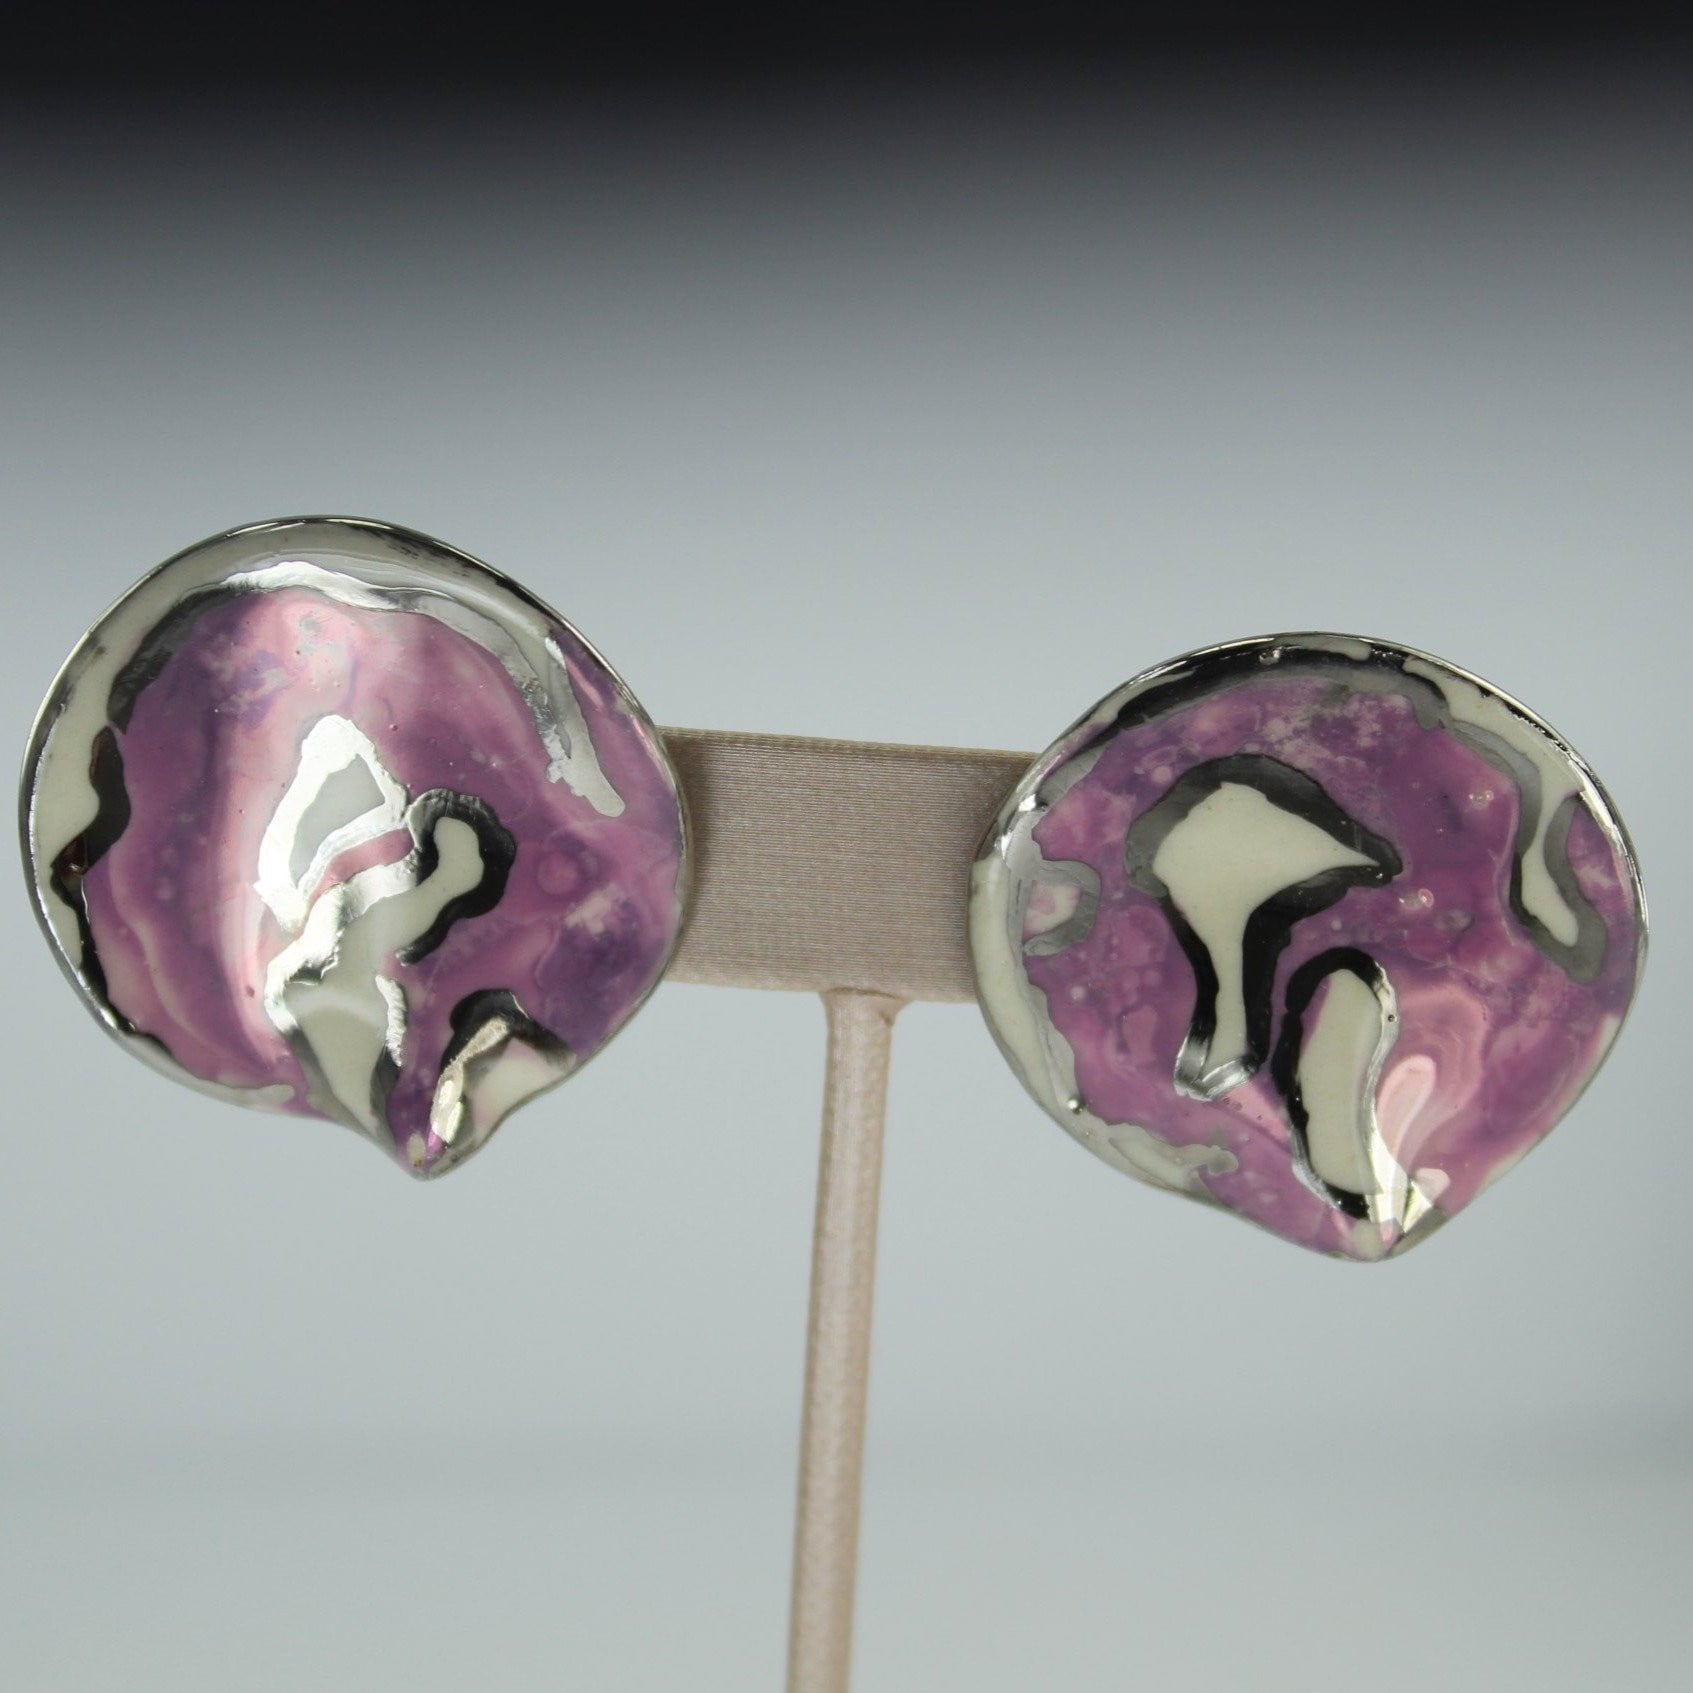 Vintage Post Earrings Large Ceramic Free Form Lavender Purple White Silver hand made